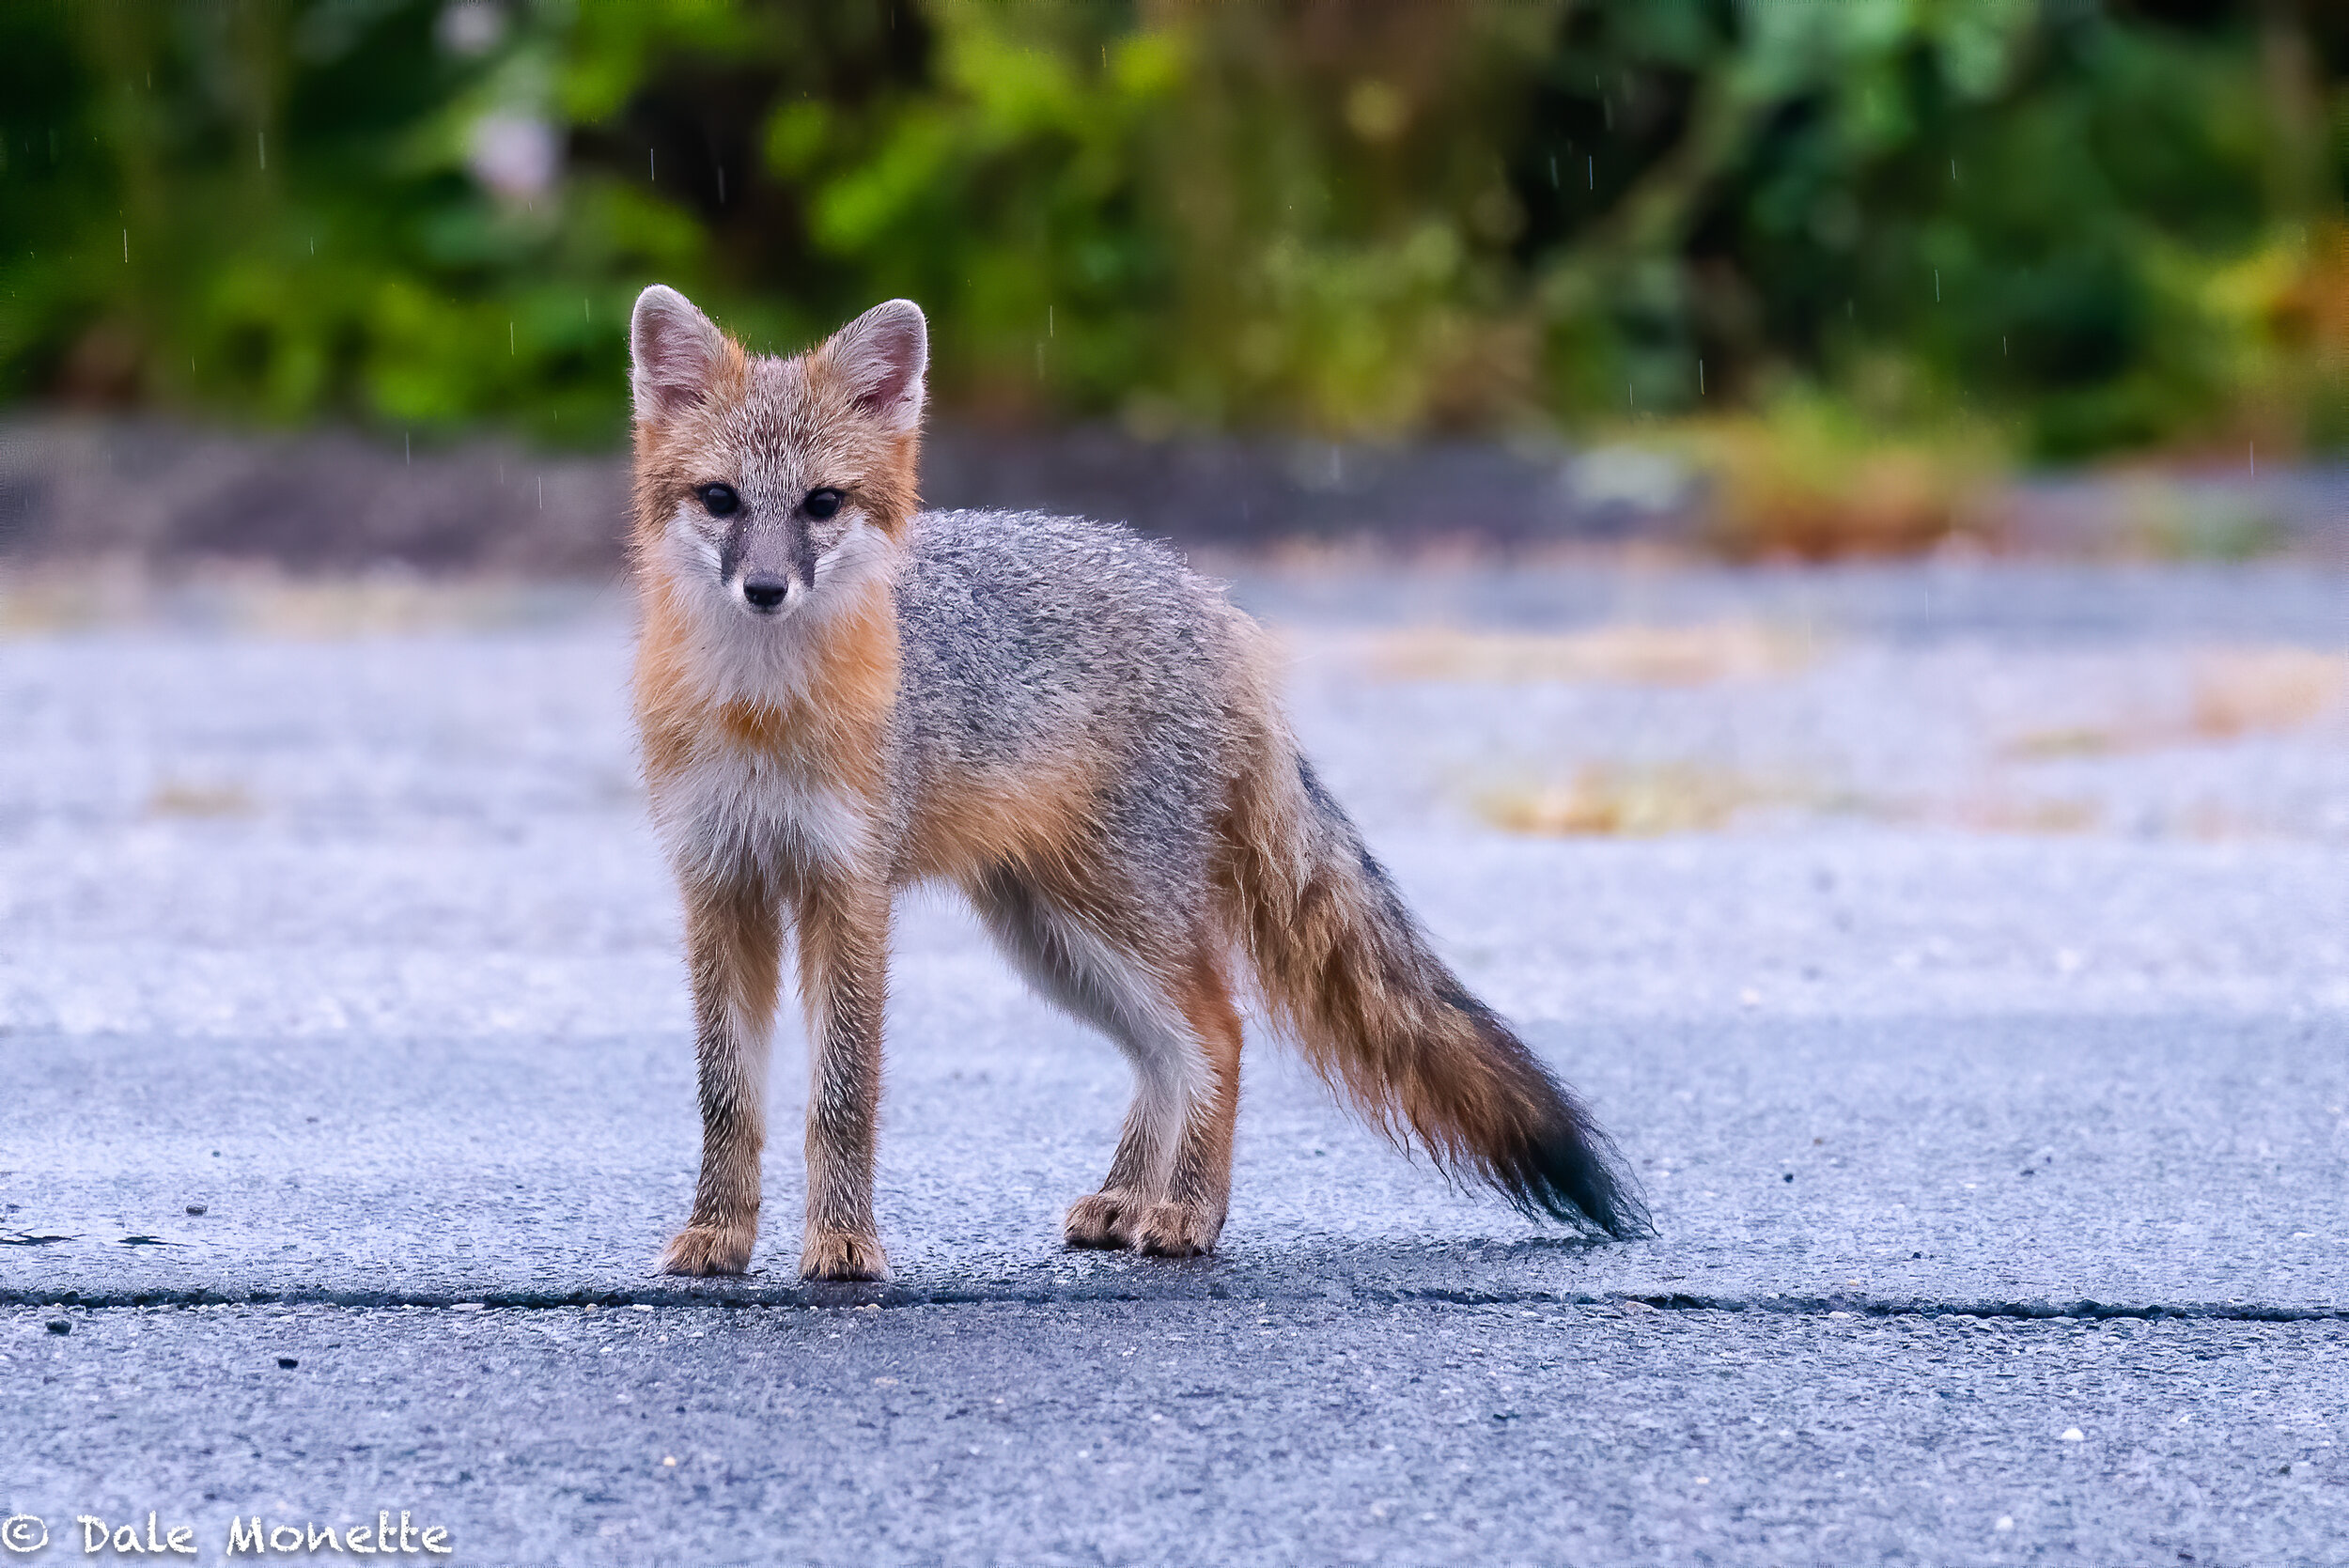   Here’s an image of the youngster gray fox wondering what the big black thing setting over there could be !     